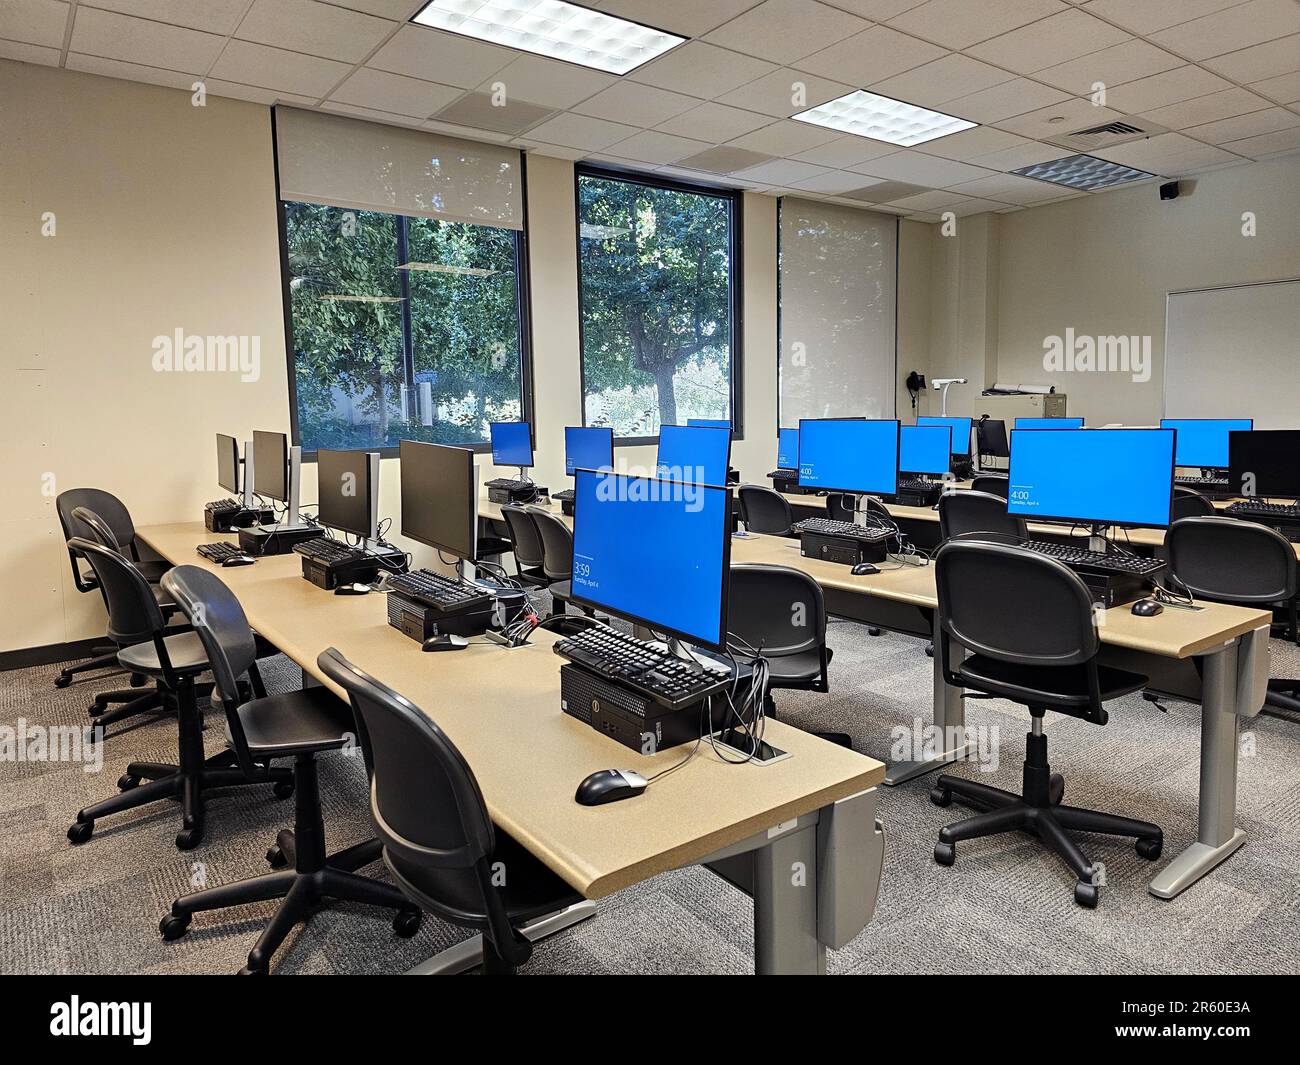 A modern classroom with computer monitors situated on desks. Stock Photo